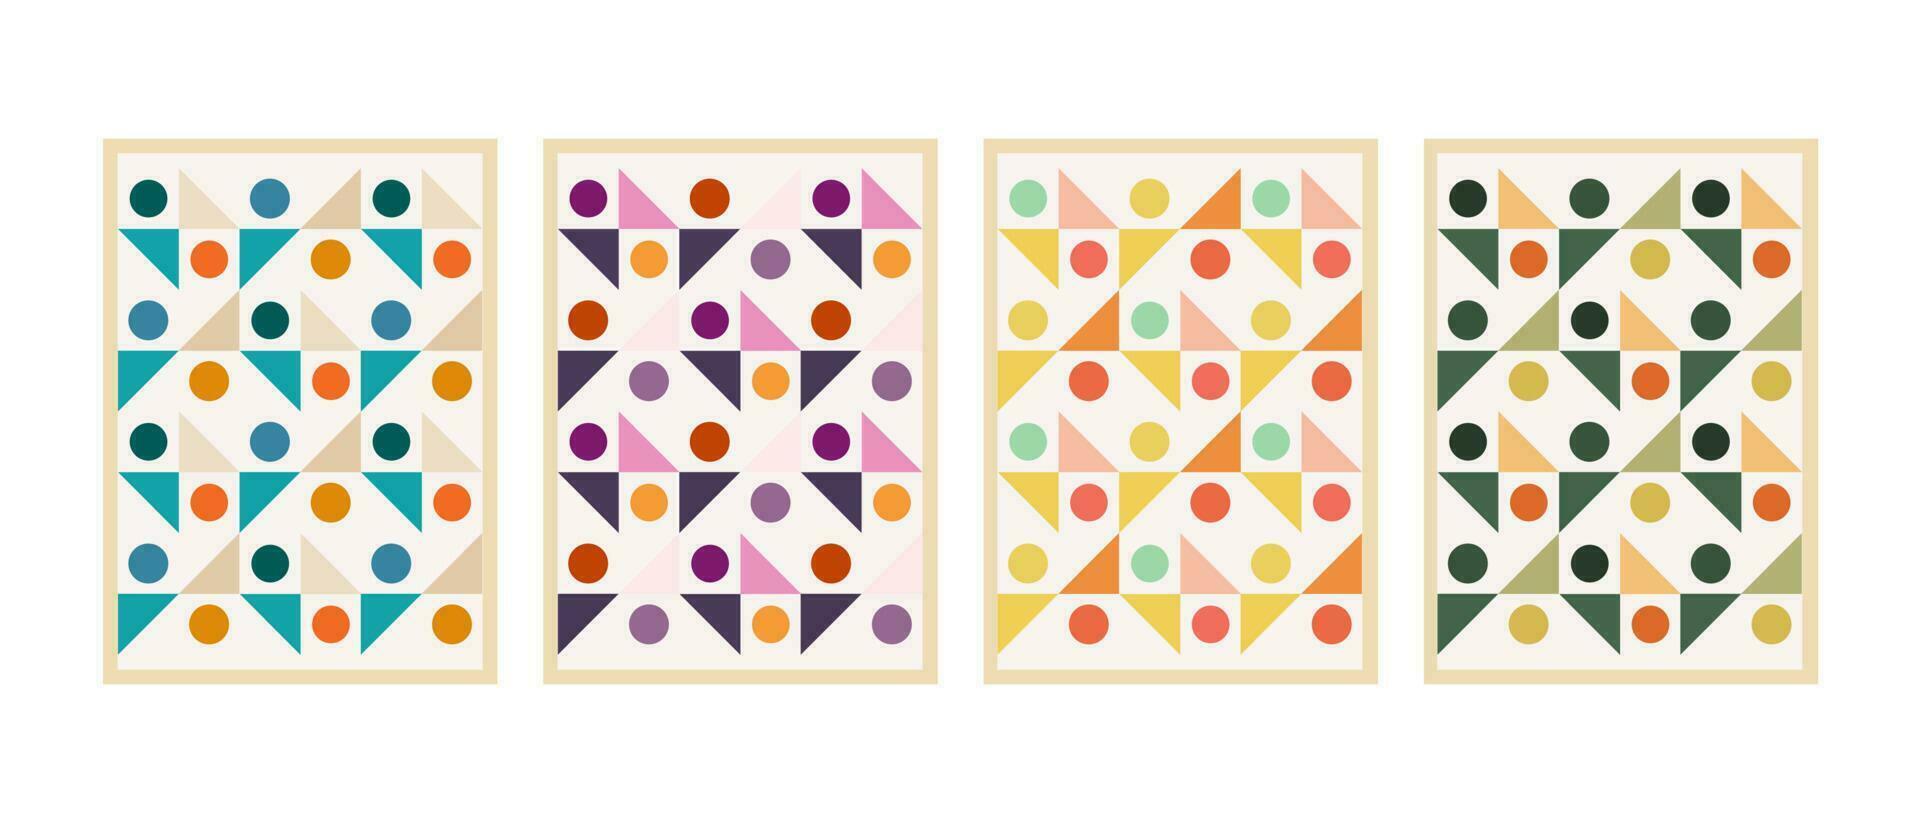 Bauhaus retro pattern background. Vector illustration abstract geometric poster. Aesthetic Bauhaus Posters Celebrating Form and Color.